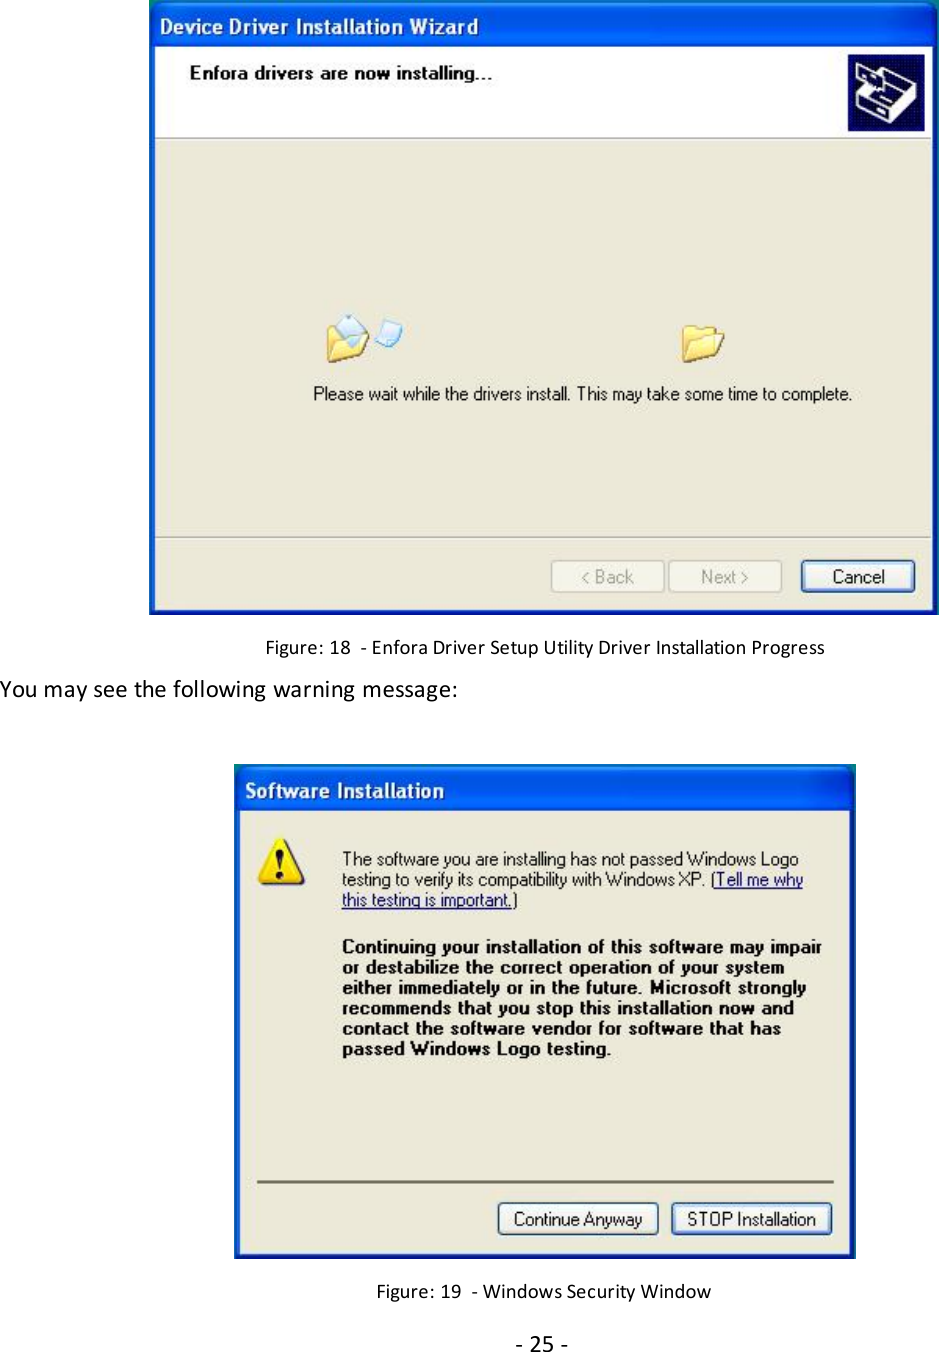 - 25 -Figure: 18 - Enfora Driver Setup Utility Driver Installation ProgressYou may see the following warning message:Figure: 19 - Windows Security Window